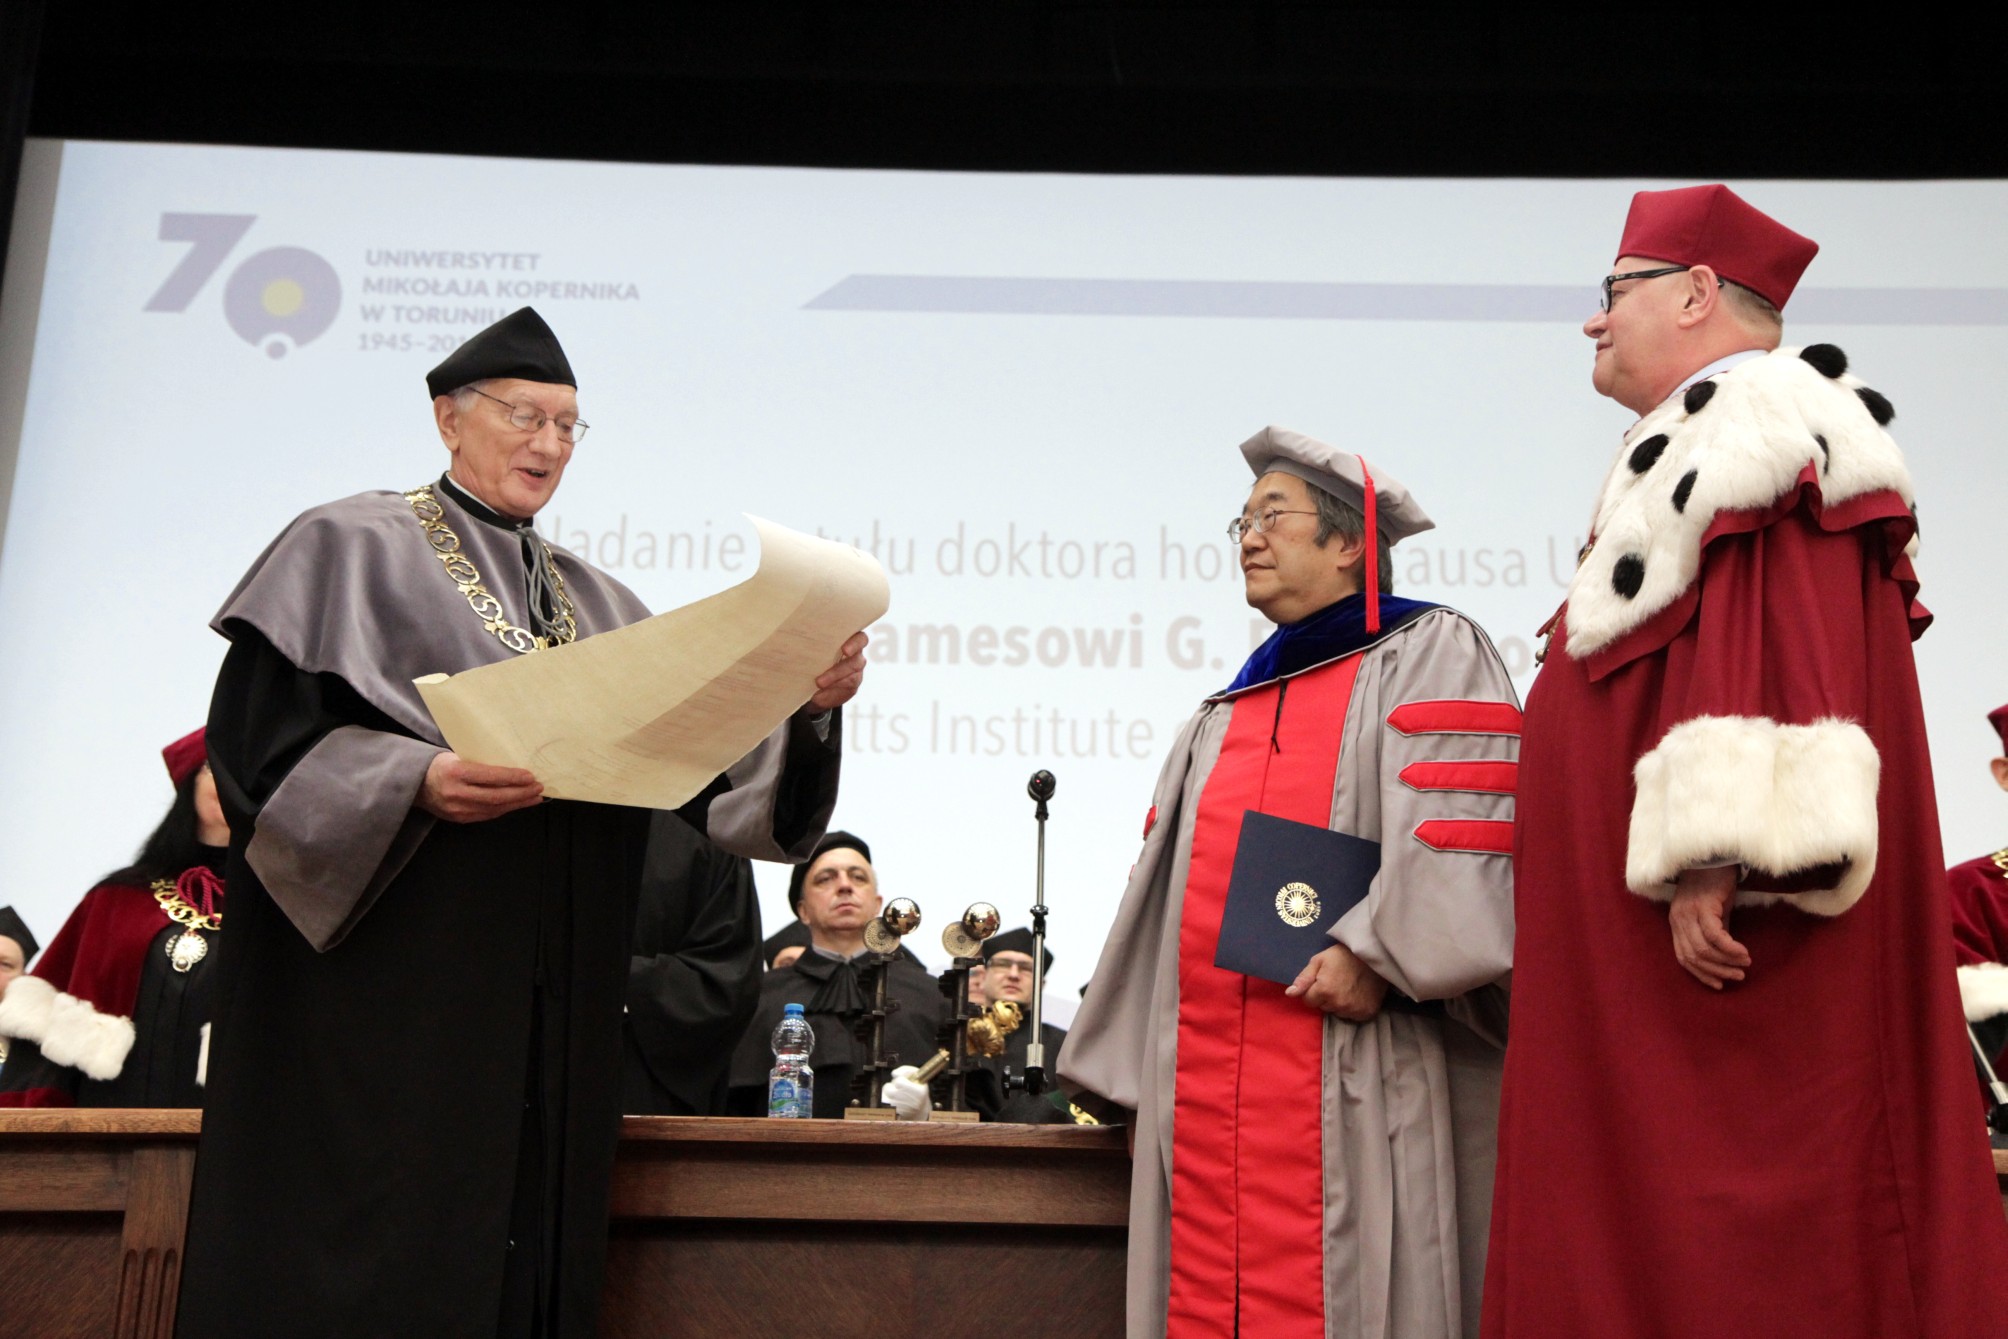 James Fujimoto Awarded the Honorary Doctorate Degree at the Nicolaus Copernicus University